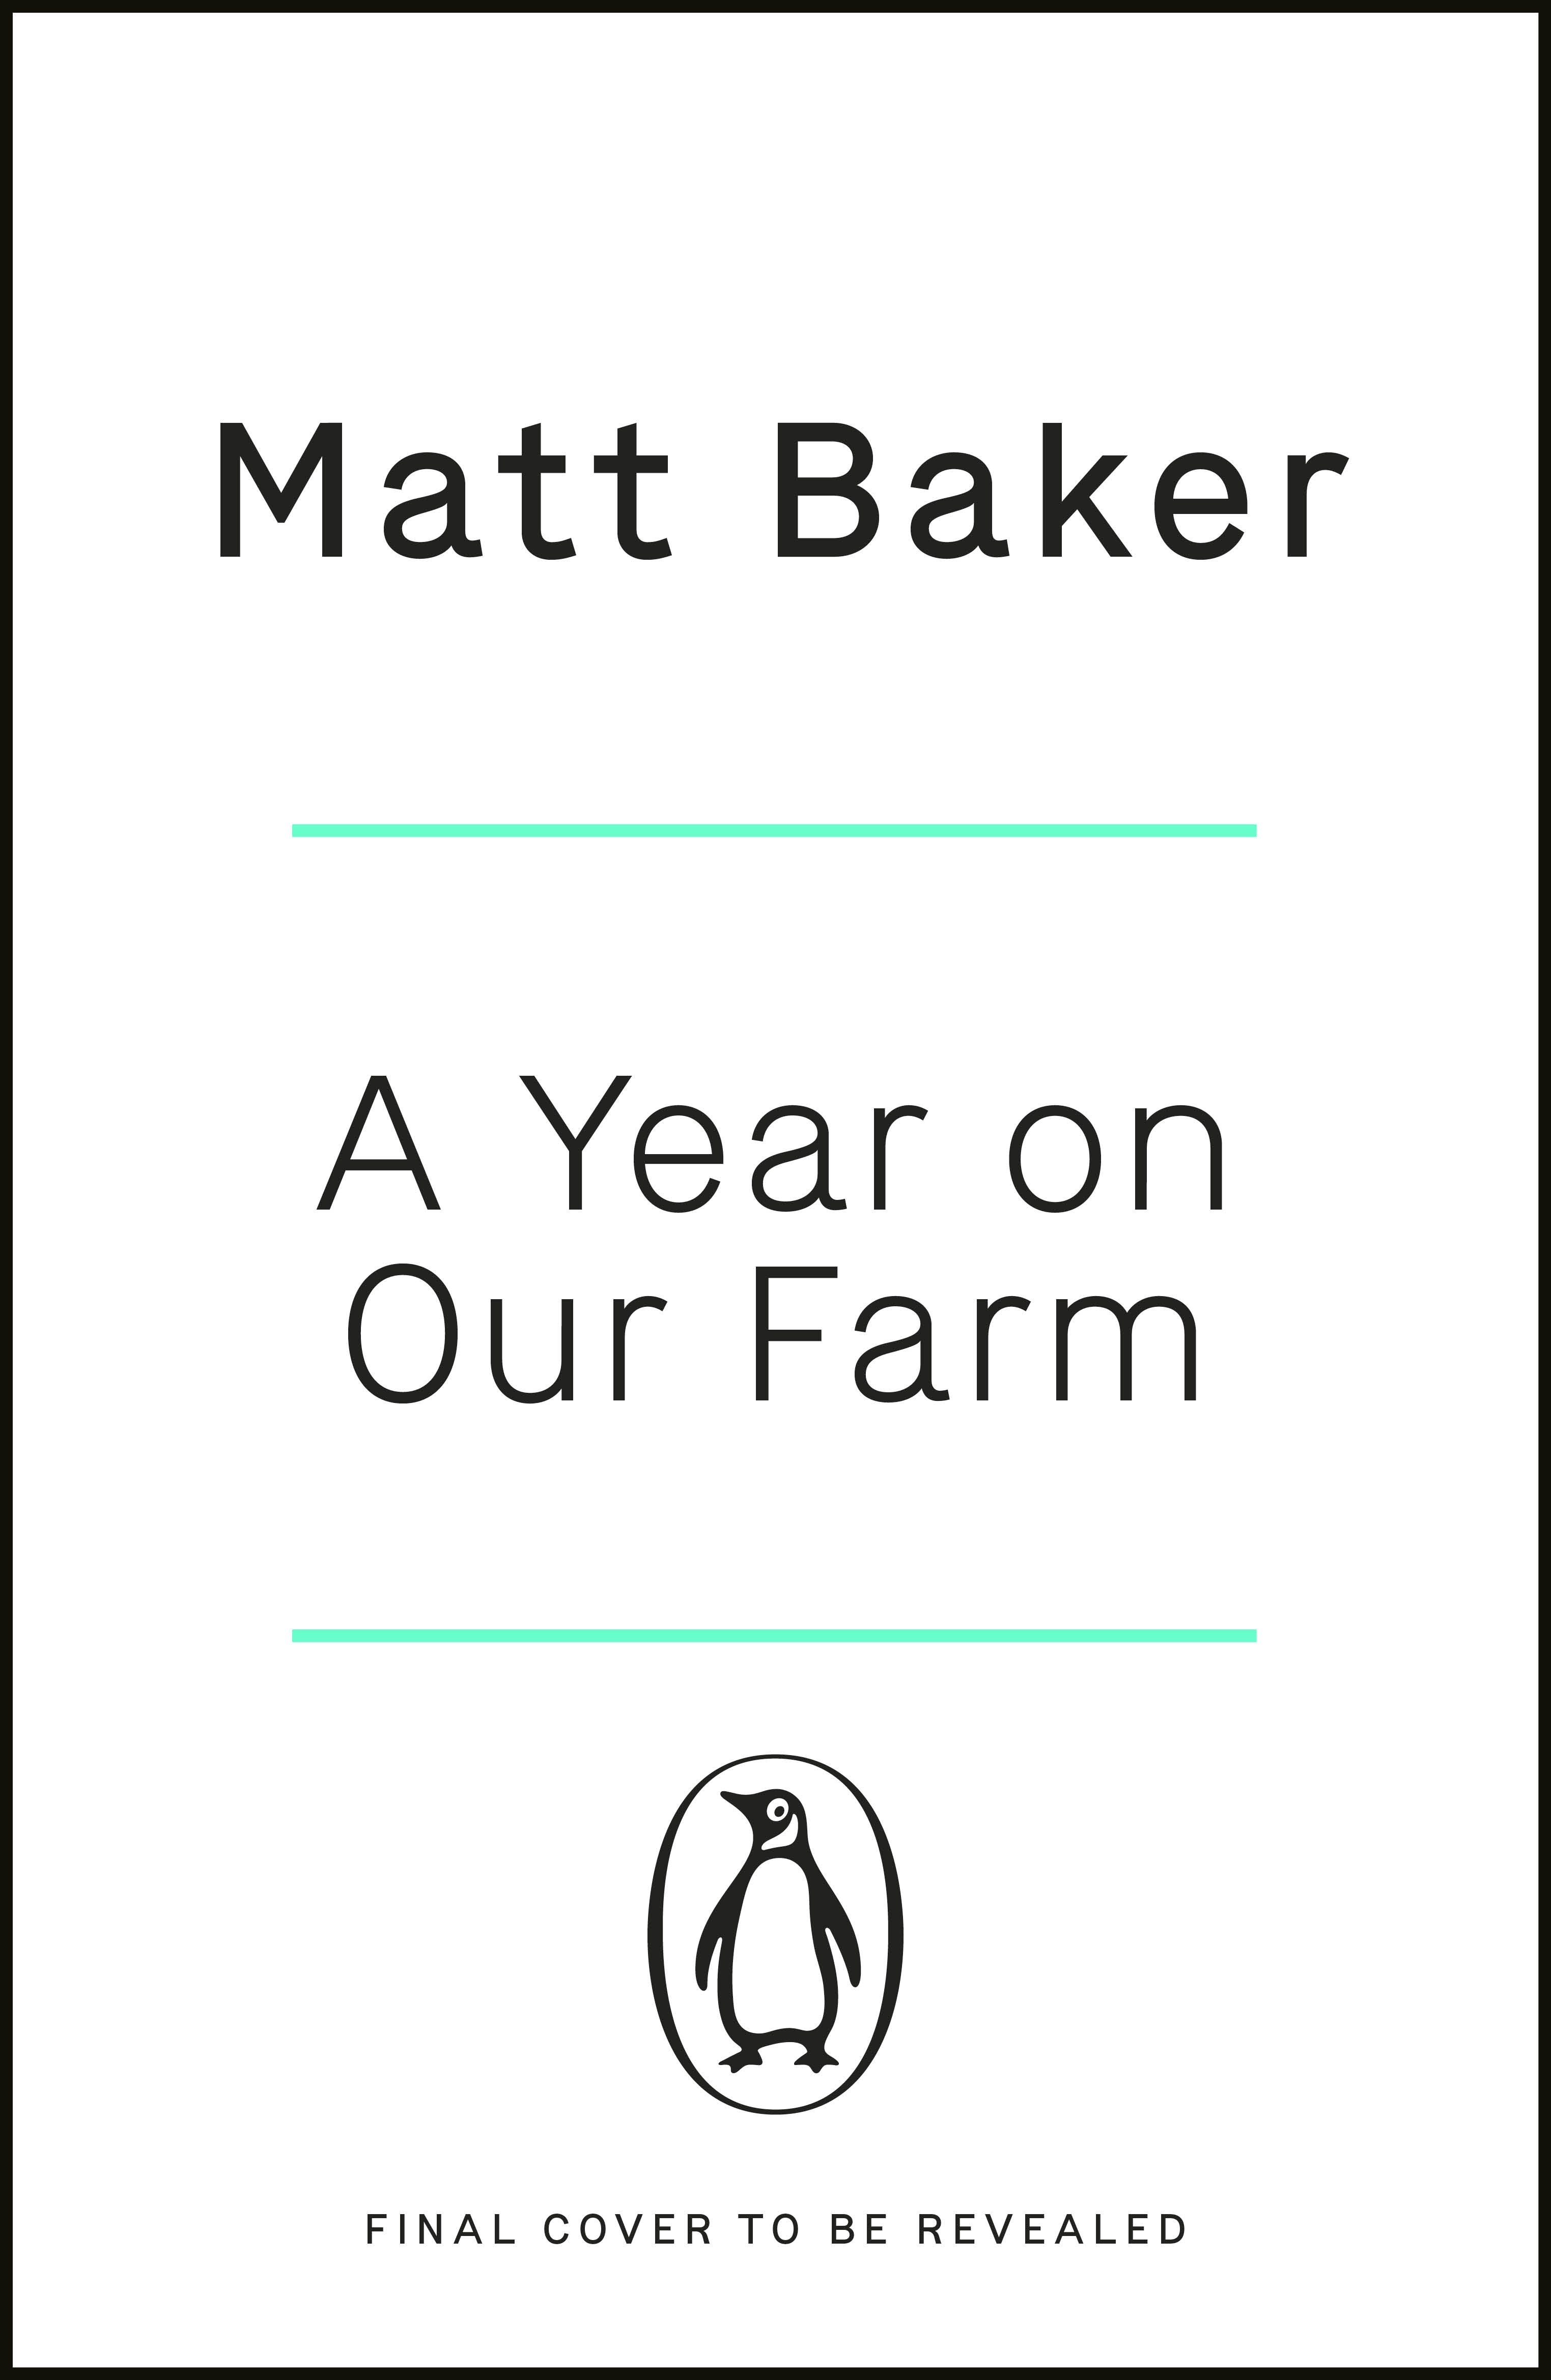 Book “A Year on Our Farm” by Matt Baker — July 7, 2022